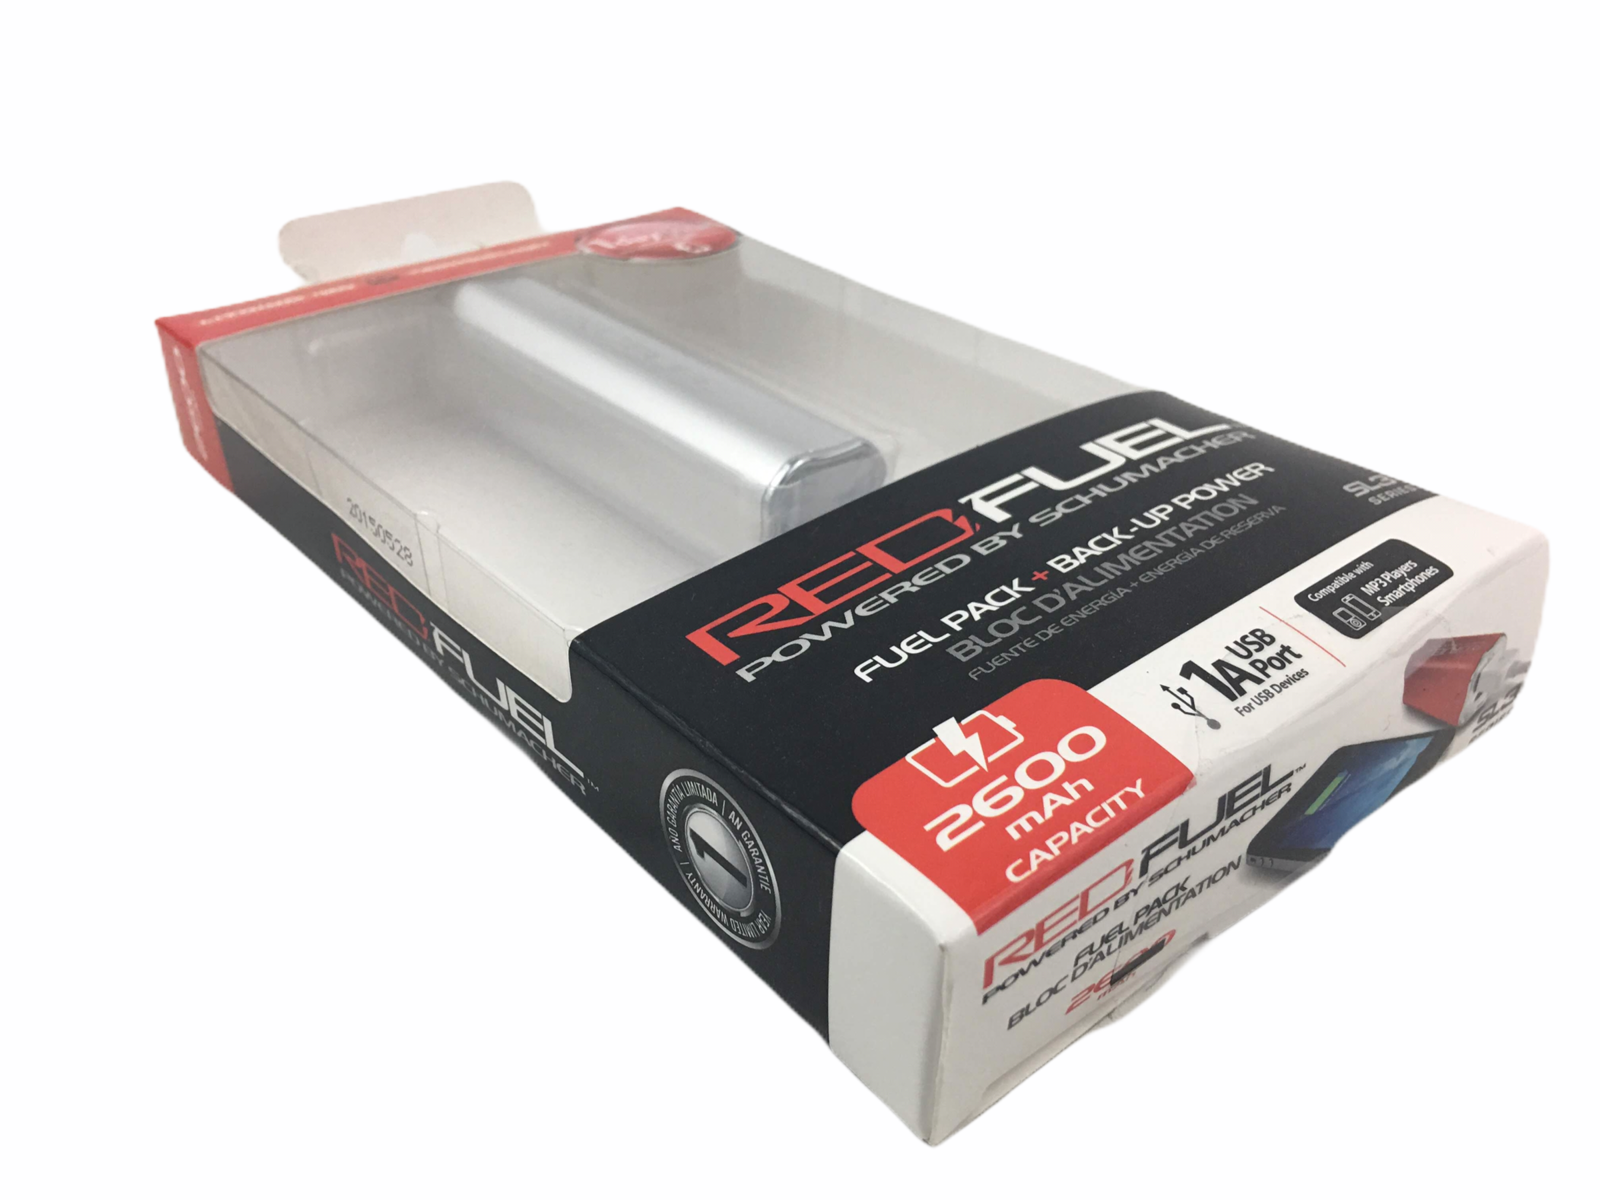 Schumacher Battery Backup SL3 Red Fuel 2600mAh Lithium Ion Fuel Pack